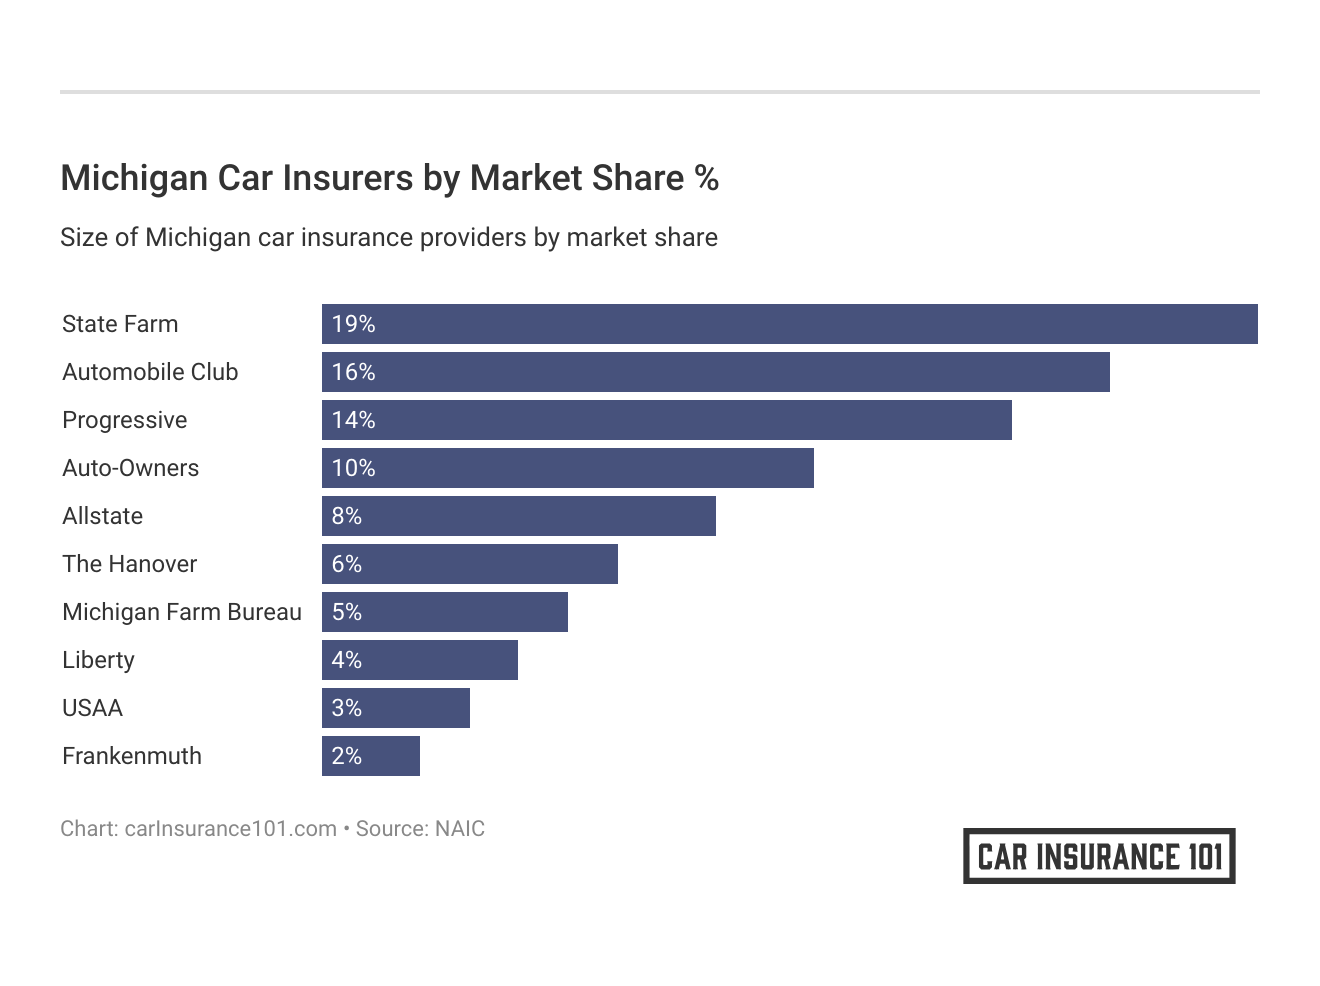 <h3>Michigan Car Insurers by Market Share %</h3>